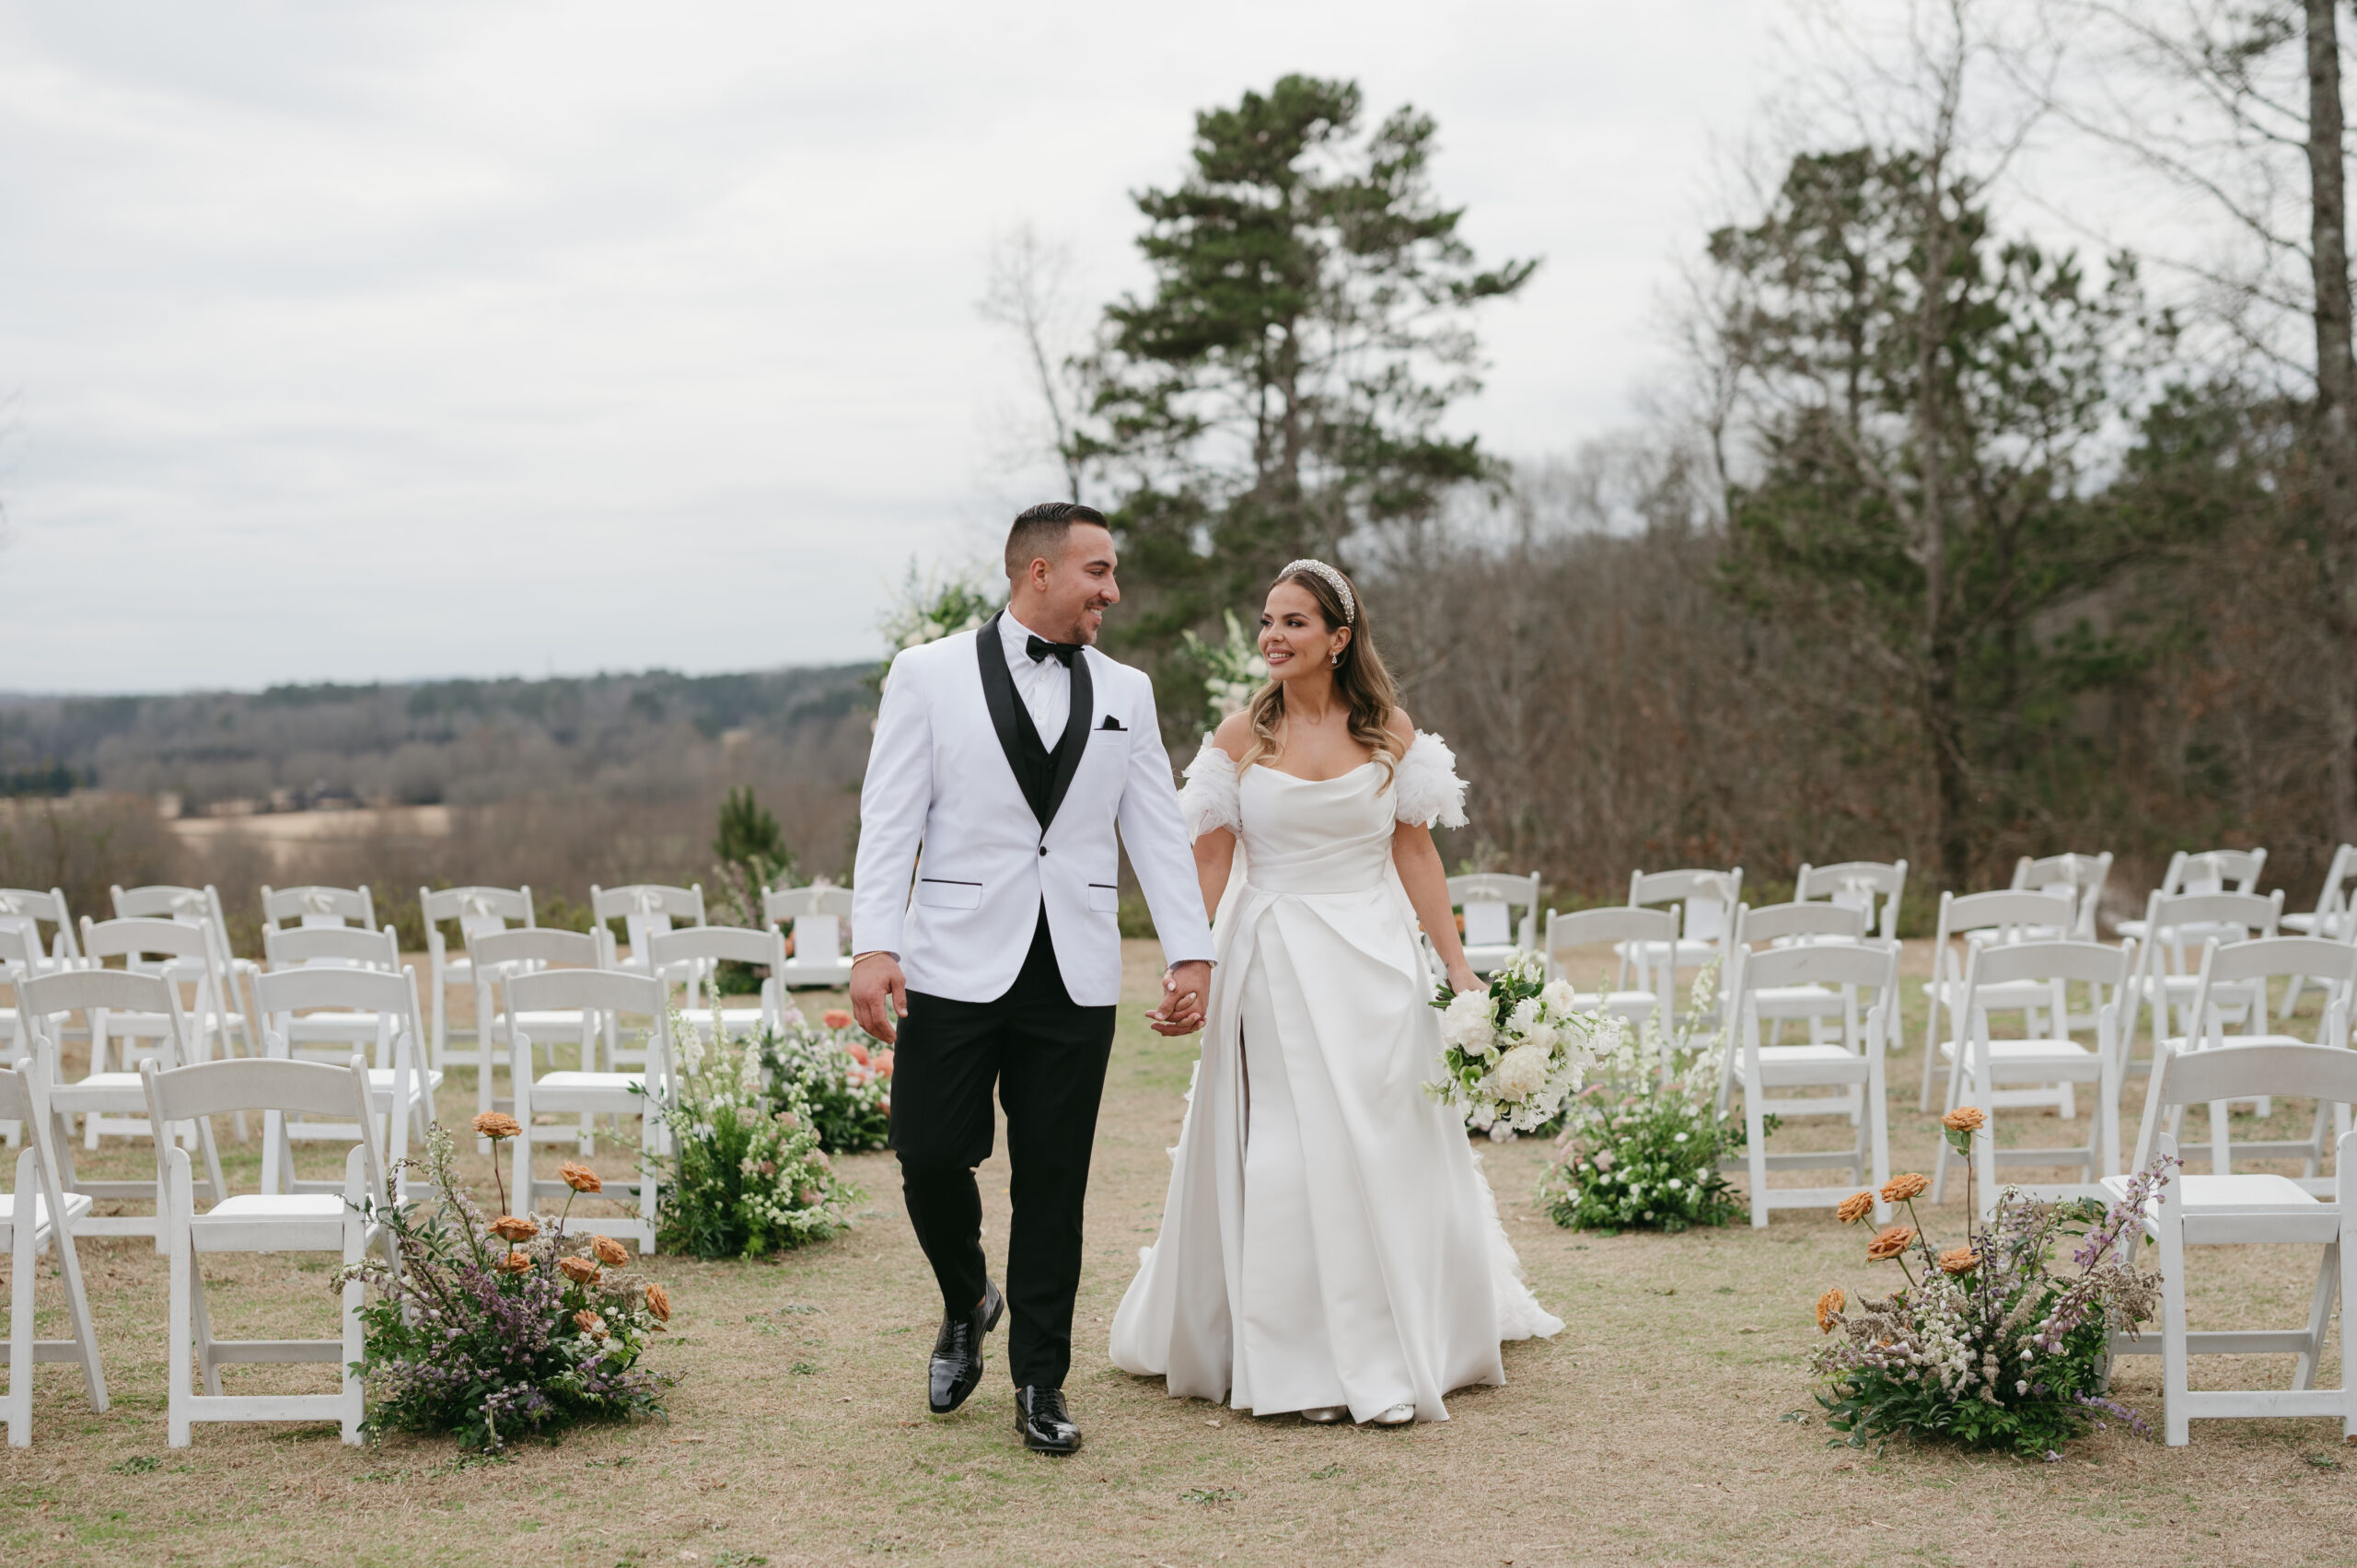 Modern wedding portraits with a bride with a bridal headband and groom with a white suit in front of their colorful floral arch. | Megan Kuhn Photography